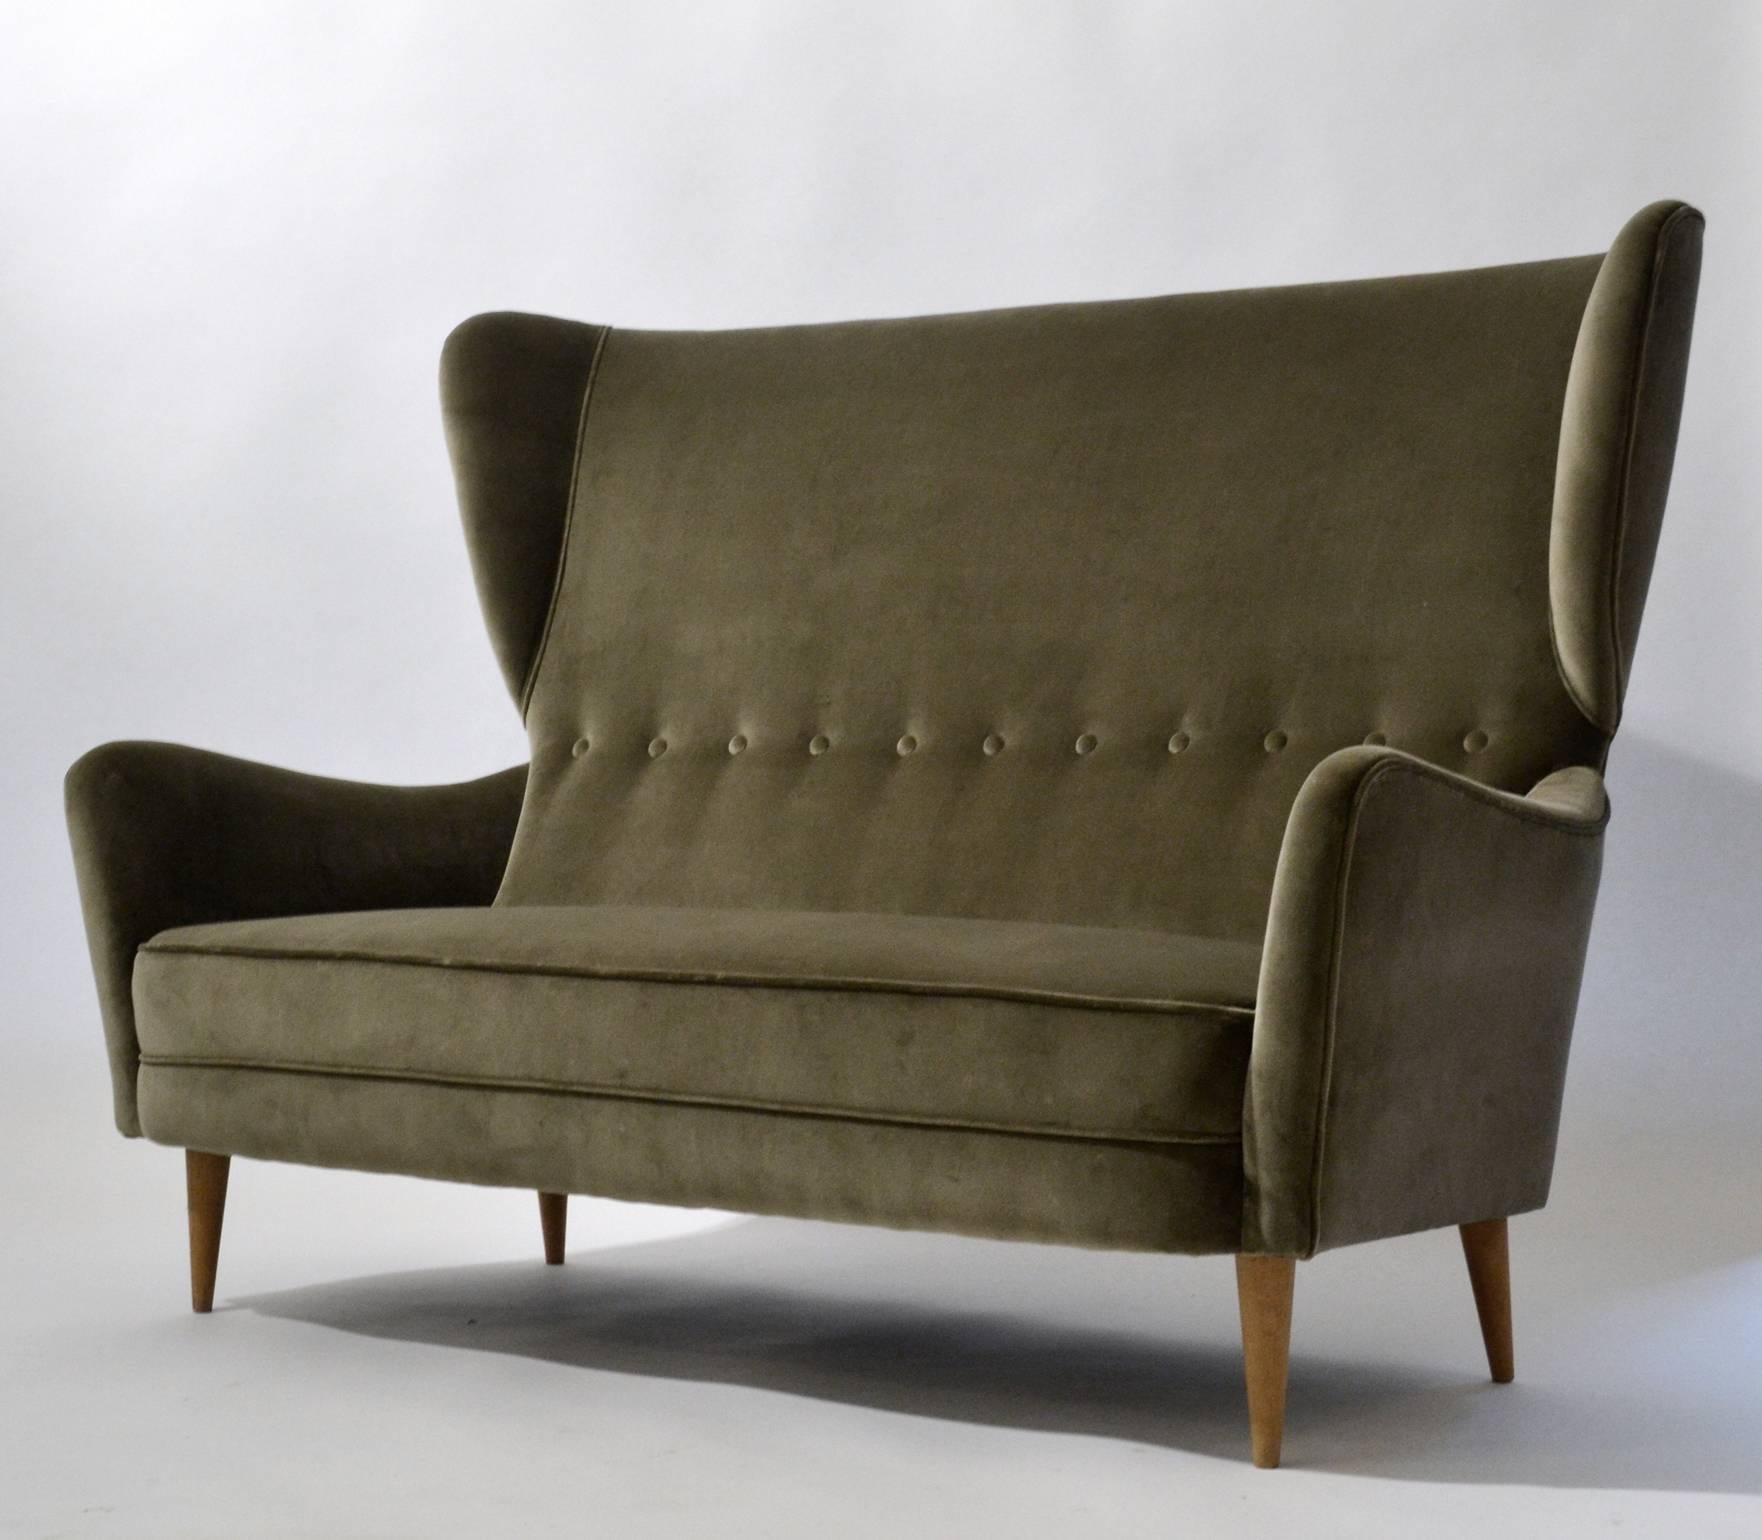 Elegant two-seat winged back sofa designed by Paolo Buffa for the Hotel Bristol, Merano, Italy, 1950's with wooden cone feet, re-upholstered in mouse grey high quality velvet.
Seat Height 37 cm / 14.5 in
   